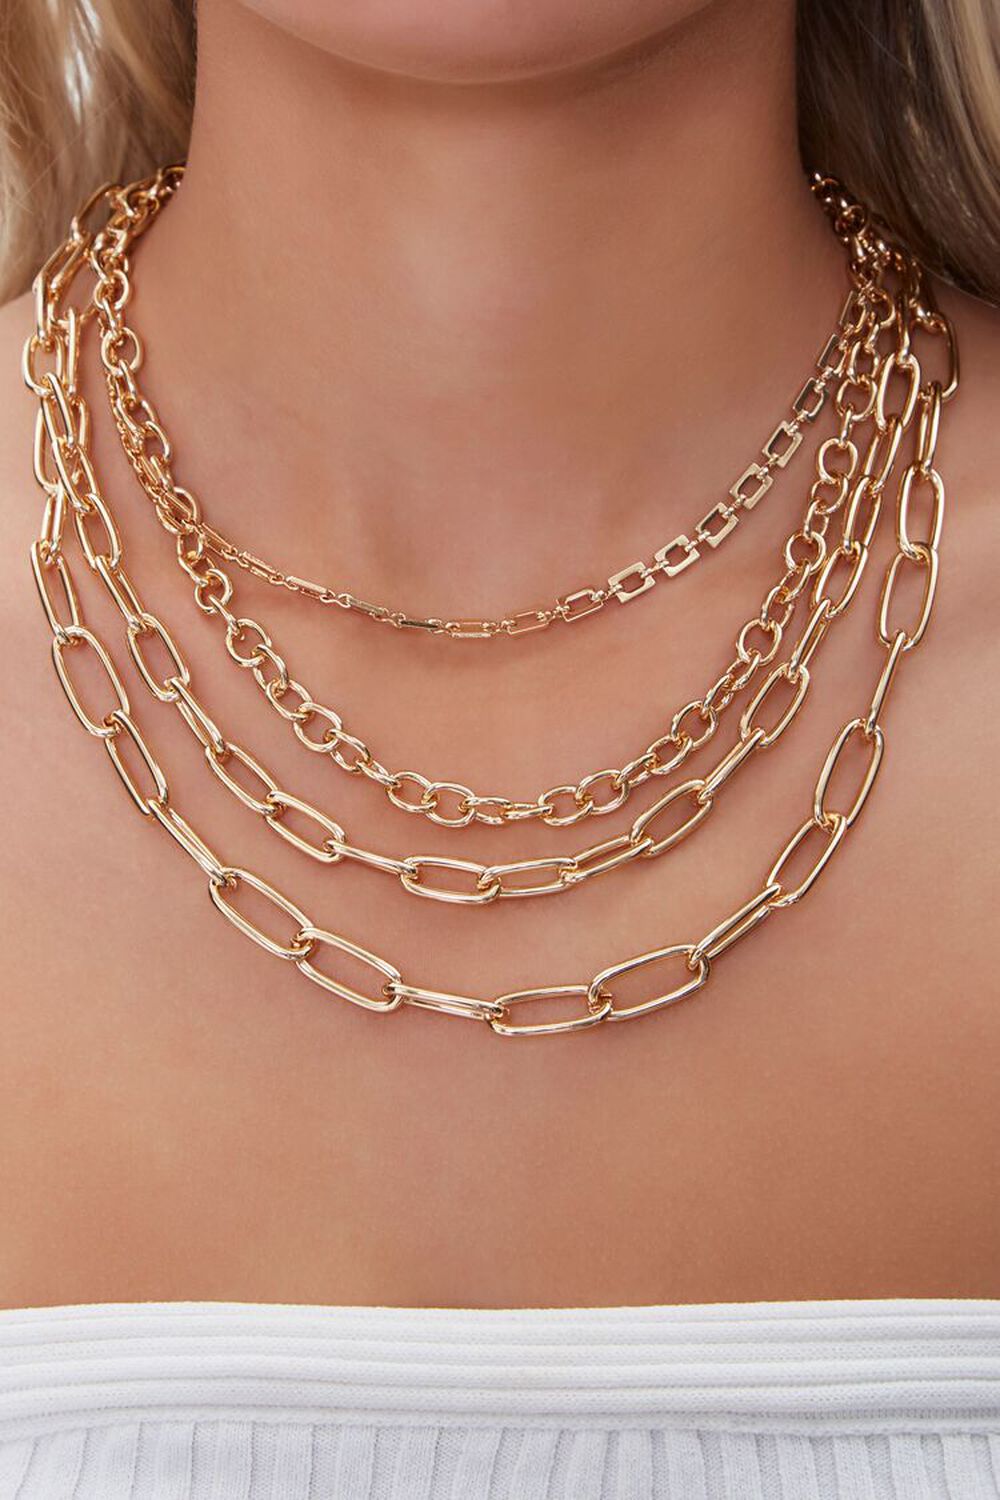 GOLD Layered Anchor Chain Necklace, image 1